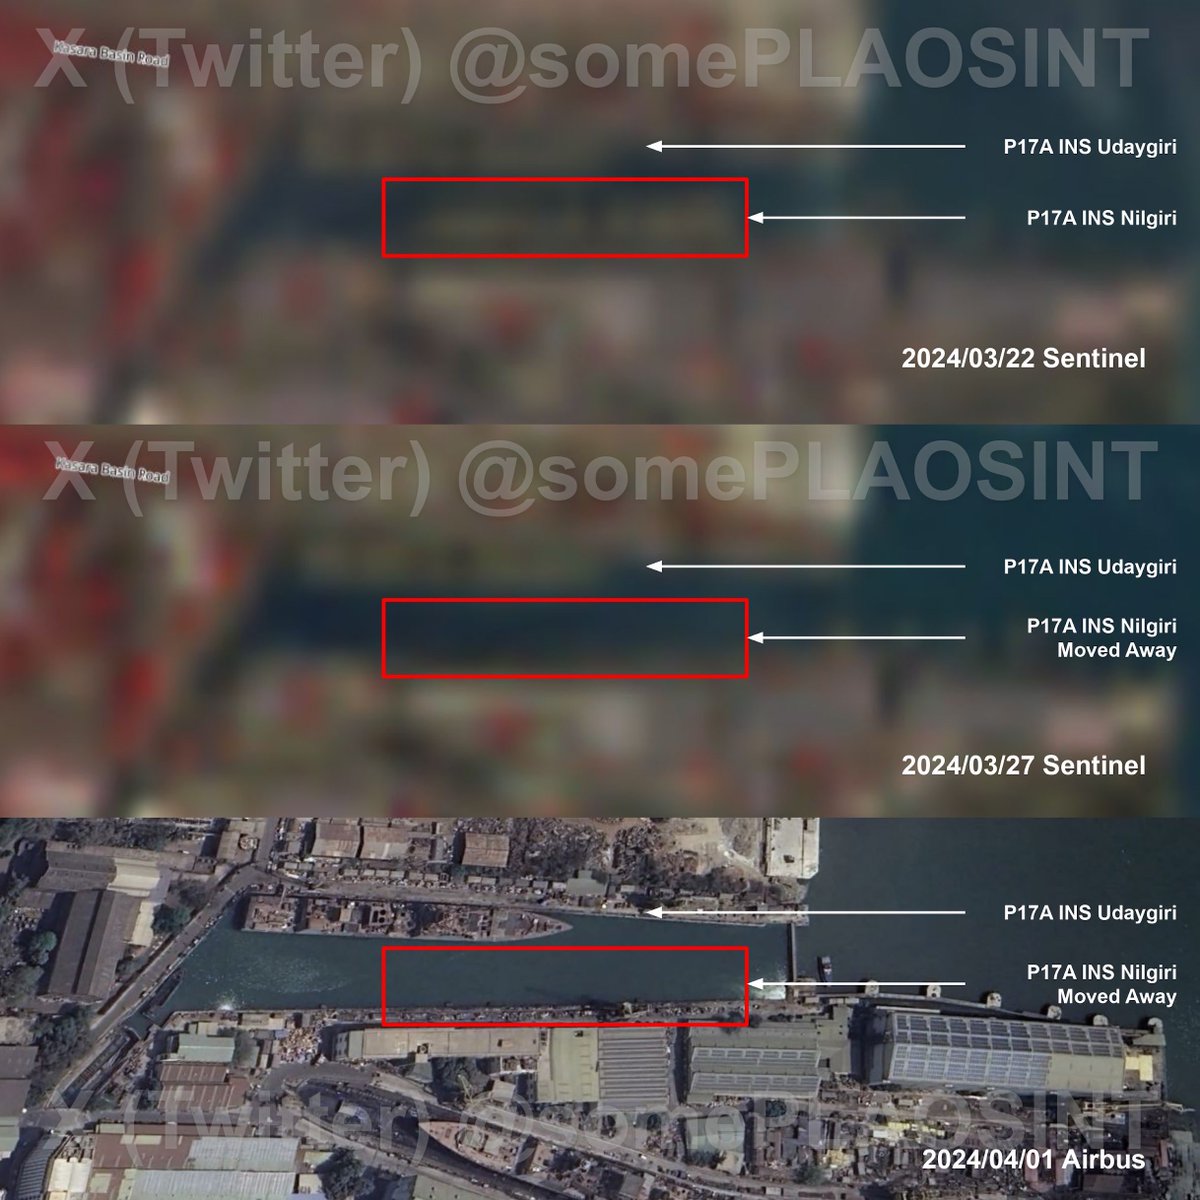 More on P17A, INS Nilgiri’s construction progress, with low resolution Sentinel data, we can see INS Nilgiri moved away from previously moored position between 2024/03/22 - 03/27.

If corroborate with tugboat AIS data we might know where it went.